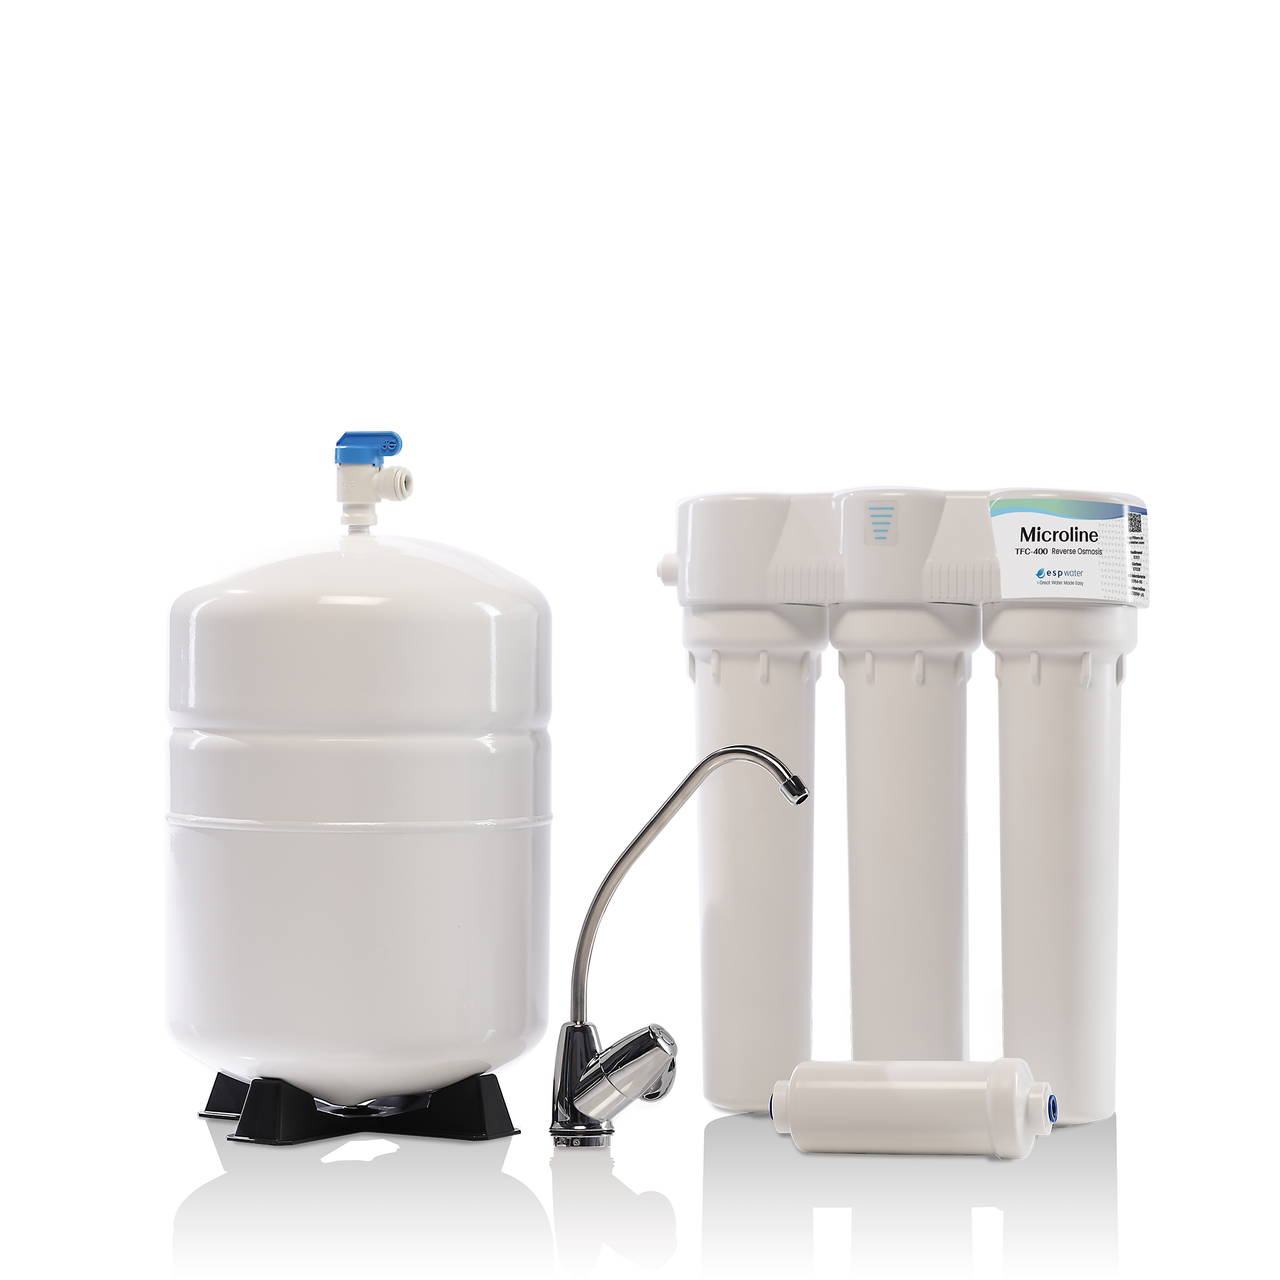 reverse osmosis water filters best for drinking water filtration